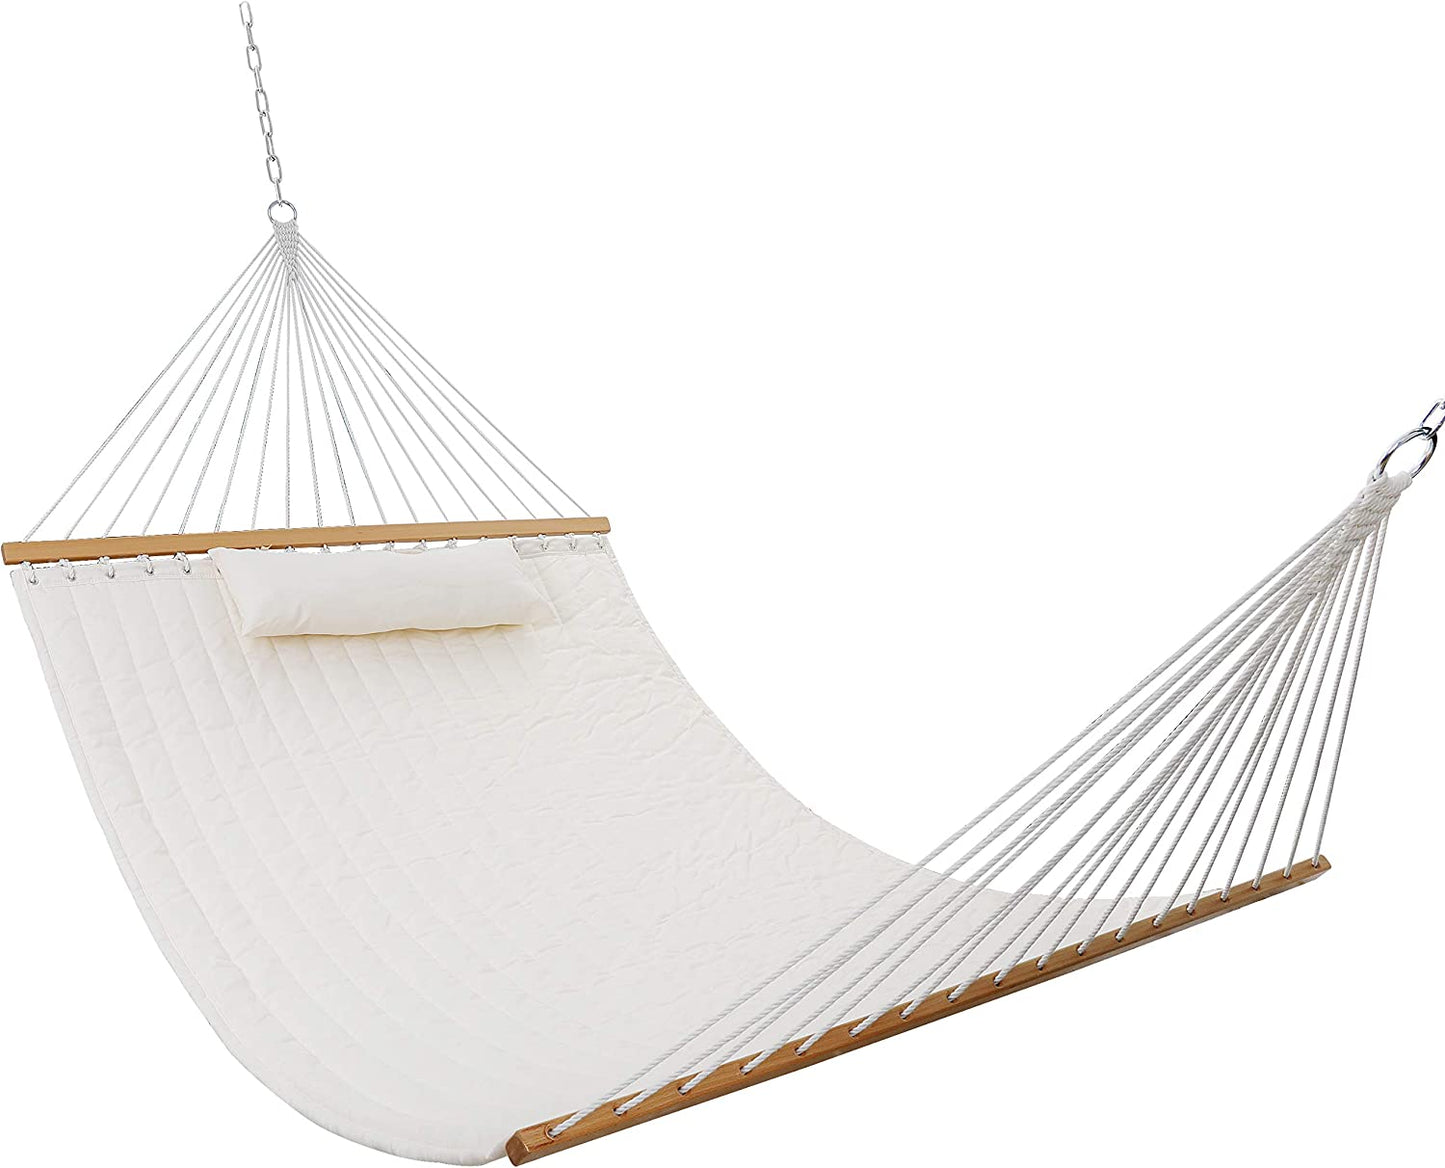 13ft Quilted Hammock Double Size for 2 Person Indoor Outdoor Hammock Swing with Pillow and Padding,Heavy Duty Spreader Bar Hammock for Outdoor Yard Poolside Porch